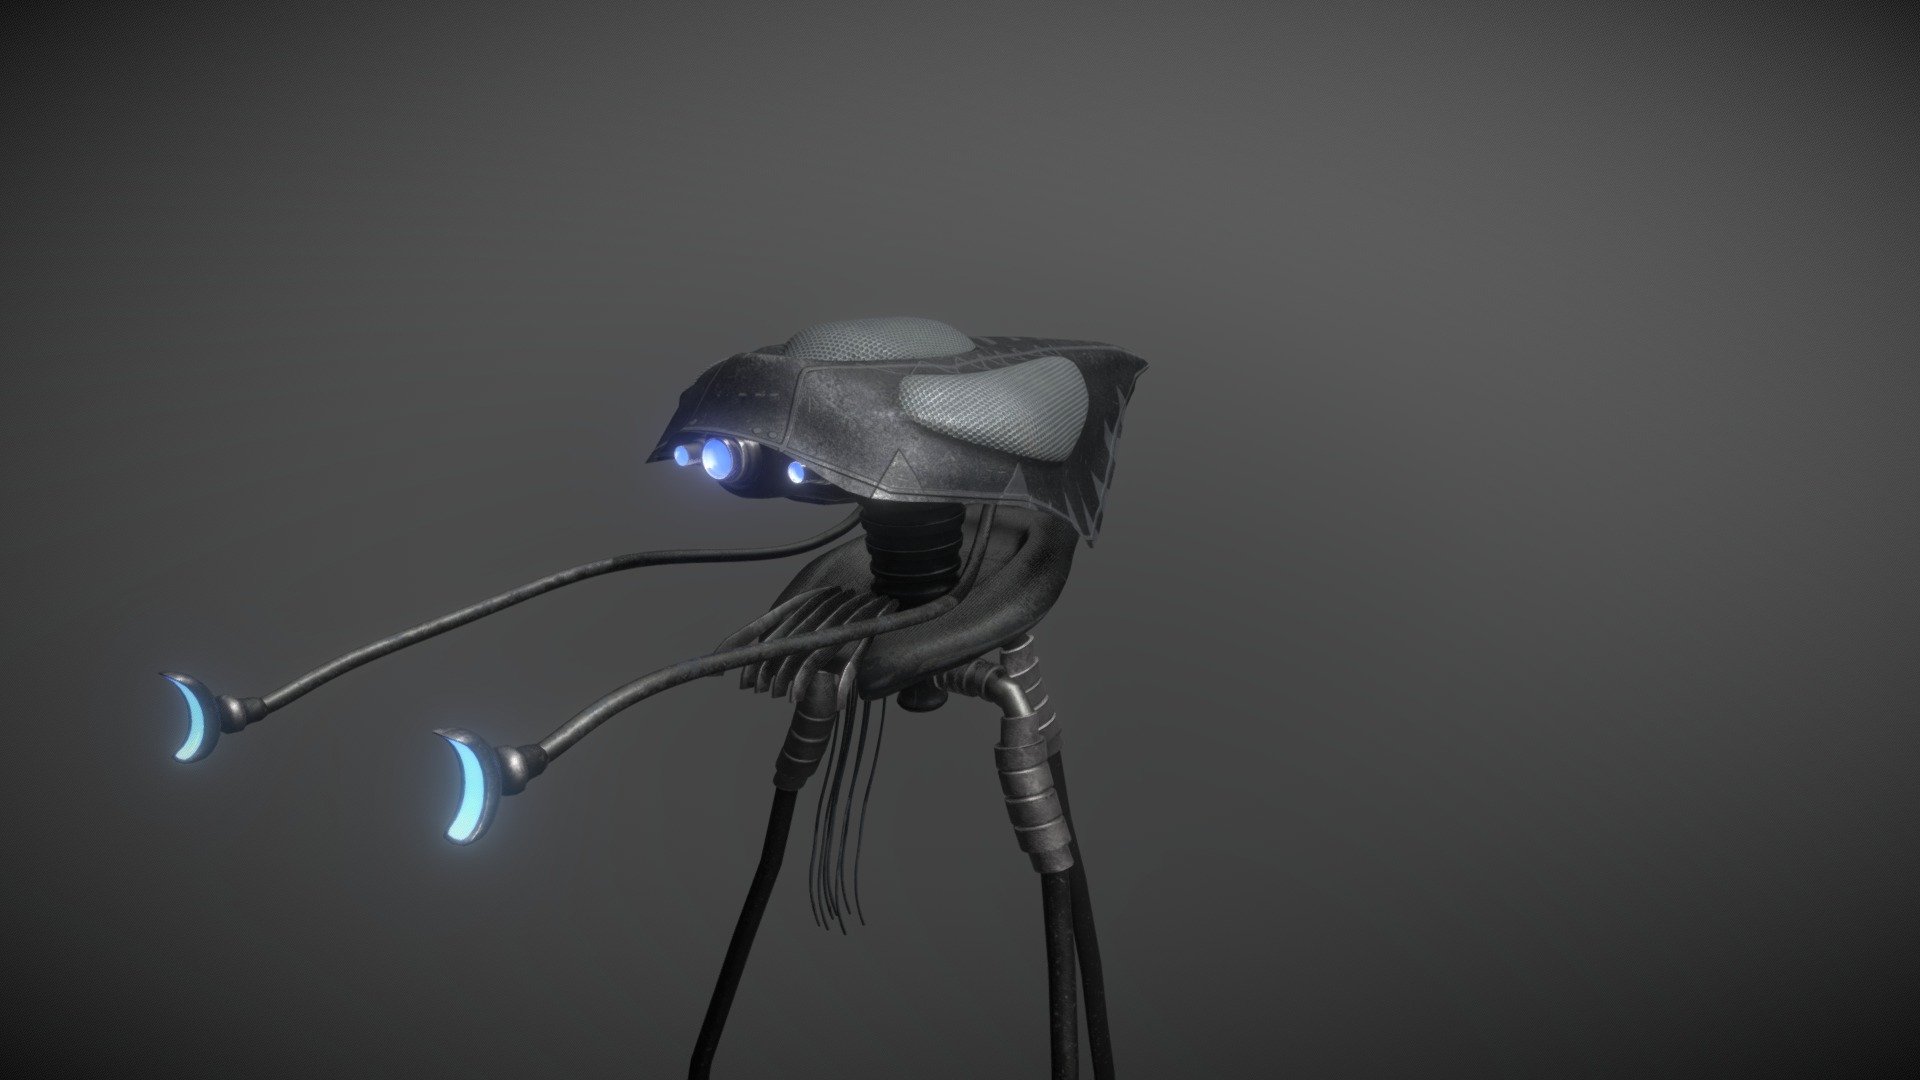 Ive really enjoyed making this project - Tripod, War of the worlds(2005) - 3D model by Bow14 3d model